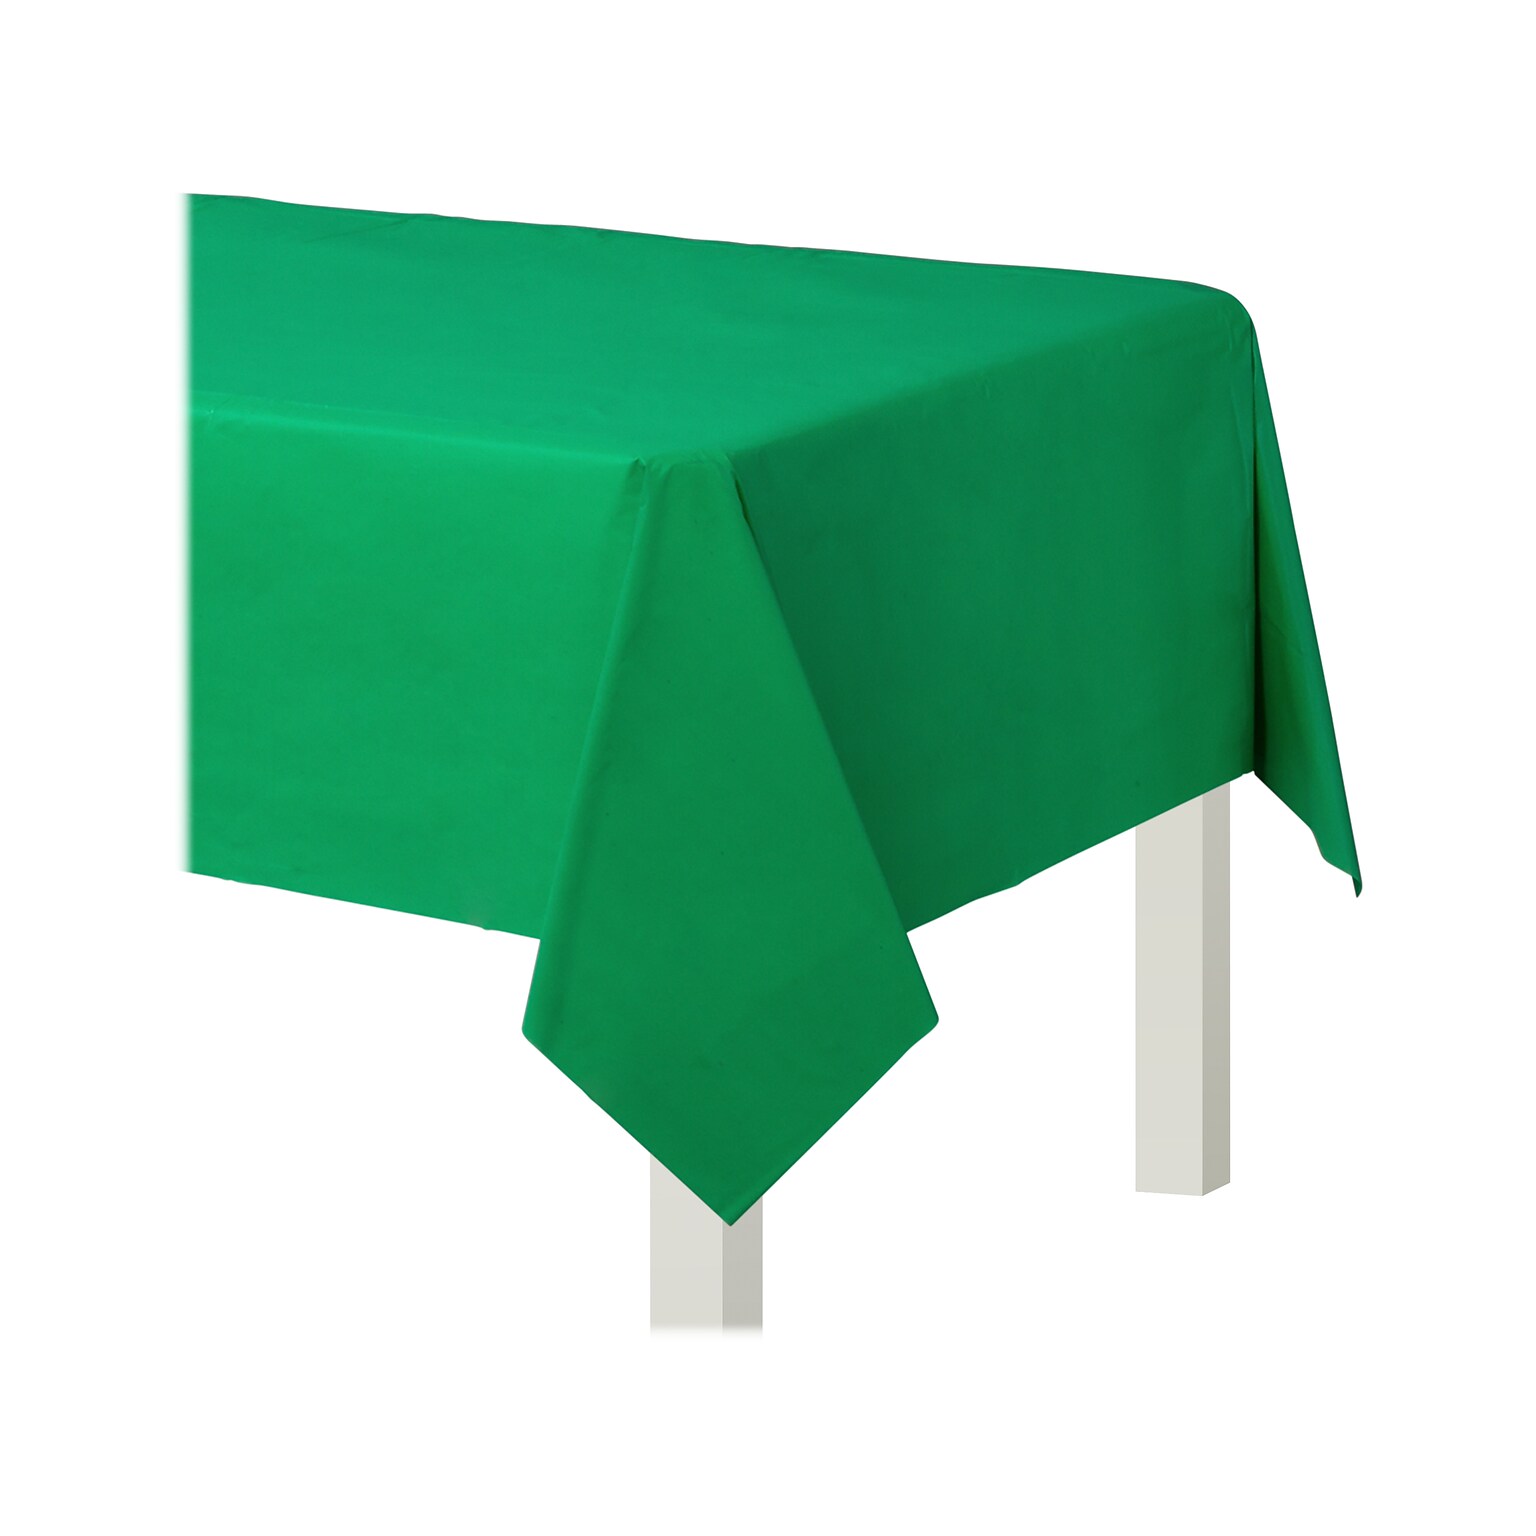 Amscan Party Table Cover, Festive Green, 2/Pack (579592.03)